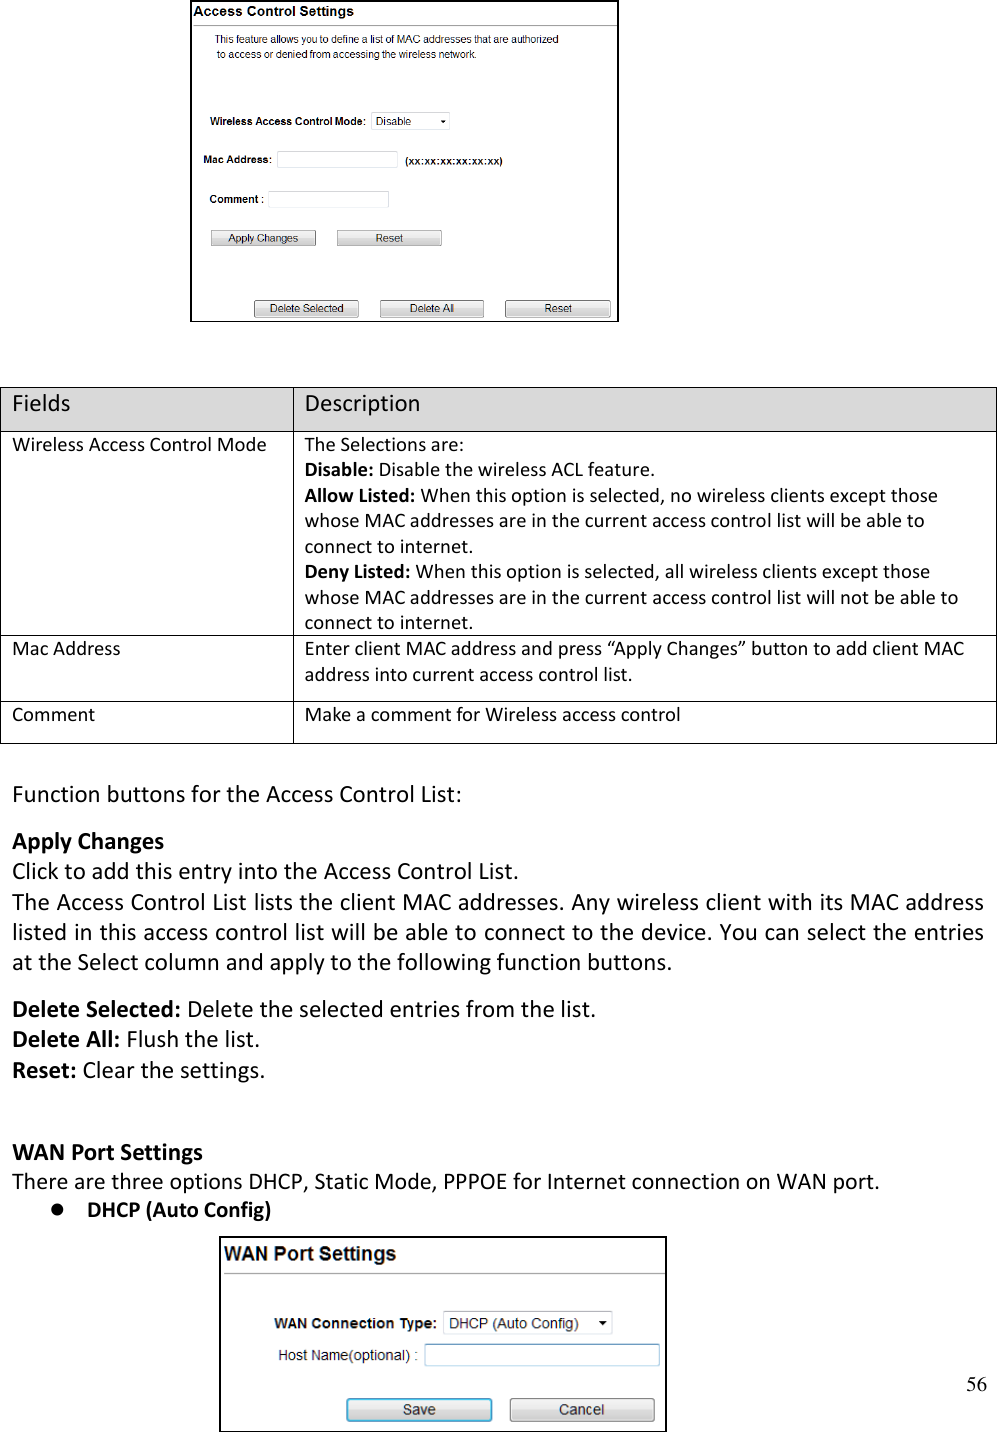 56                                  Fields Description Wireless Access Control Mode The Selections are:  Disable: Disable the wireless ACL feature.  Allow Listed: When this option is selected, no wireless clients except those whose MAC addresses are in the current access control list will be able to connect to internet.  Deny Listed: When this option is selected, all wireless clients except those whose MAC addresses are in the current access control list will not be able to connect to internet. Mac Address Enter client MAC address and press “Apply Changes” button to add client MAC address into current access control list. Comment Make a comment for Wireless access control  Function buttons for the Access Control List:  Apply Changes  Click to add this entry into the Access Control List.  The Access Control List lists the client MAC addresses. Any wireless client with its MAC address listed in this access control list will be able to connect to the device. You can select the entries at the Select column and apply to the following function buttons.  Delete Selected: Delete the selected entries from the list.  Delete All: Flush the list.  Reset: Clear the settings.  WAN Port Settings There are three options DHCP, Static Mode, PPPOE for Internet connection on WAN port.  DHCP (Auto Config)                             